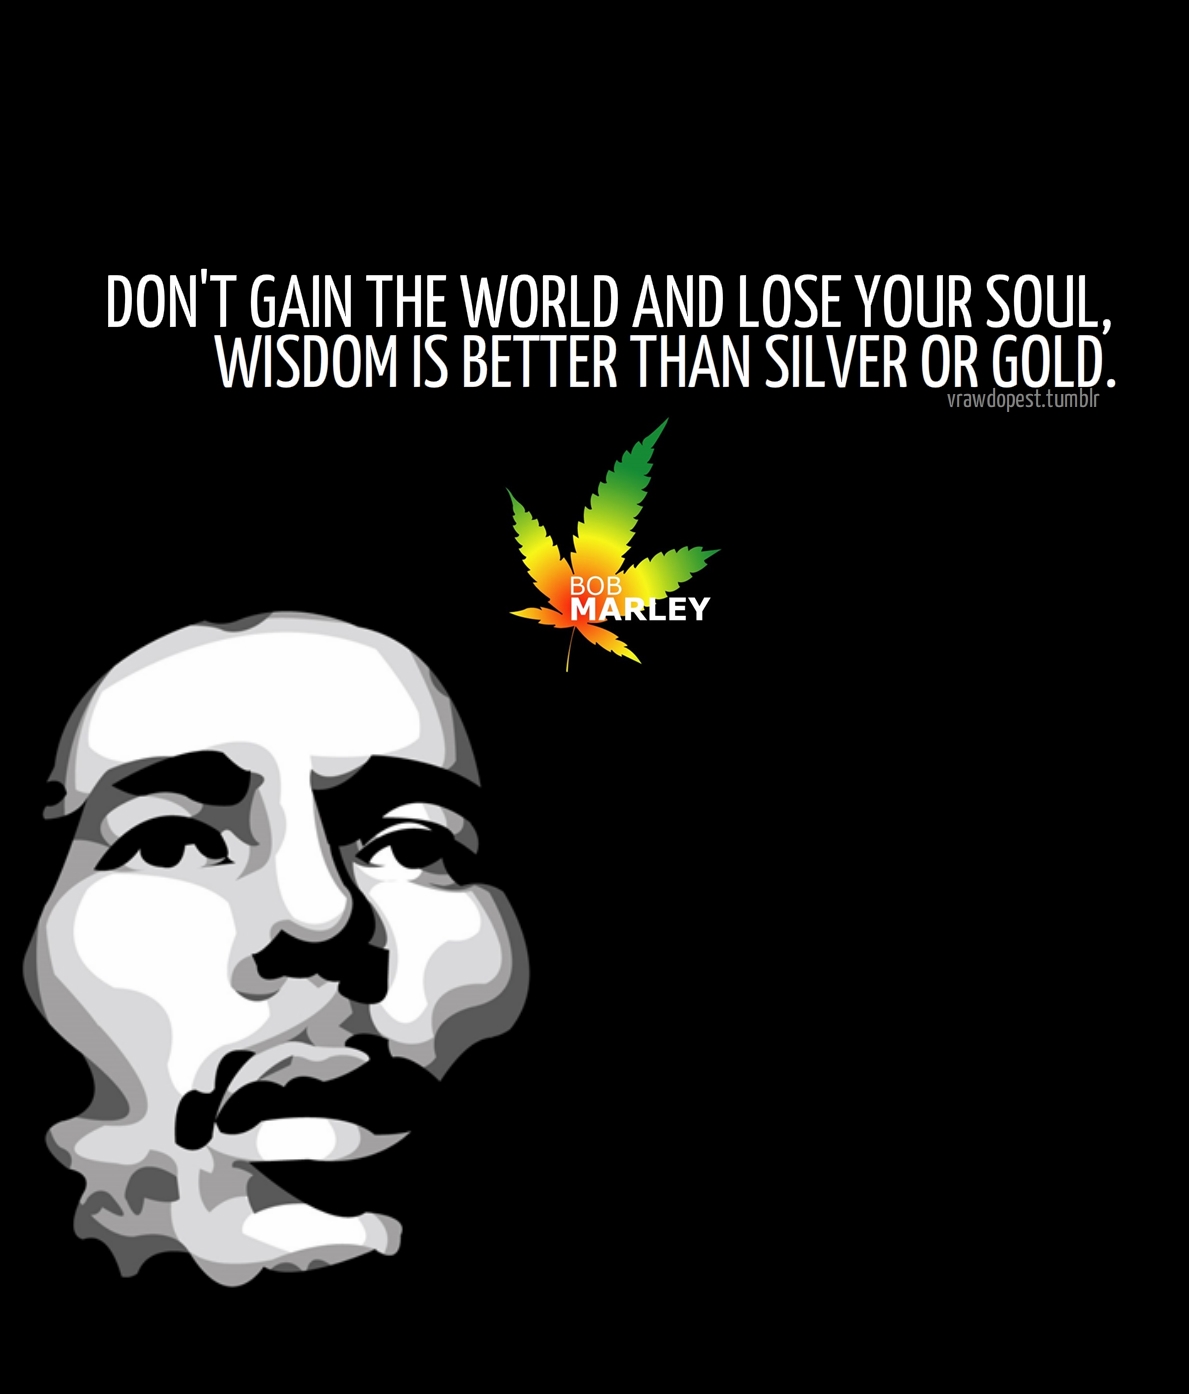 Bob-Marley-Quote-Iphone-Wallpapers.jpg